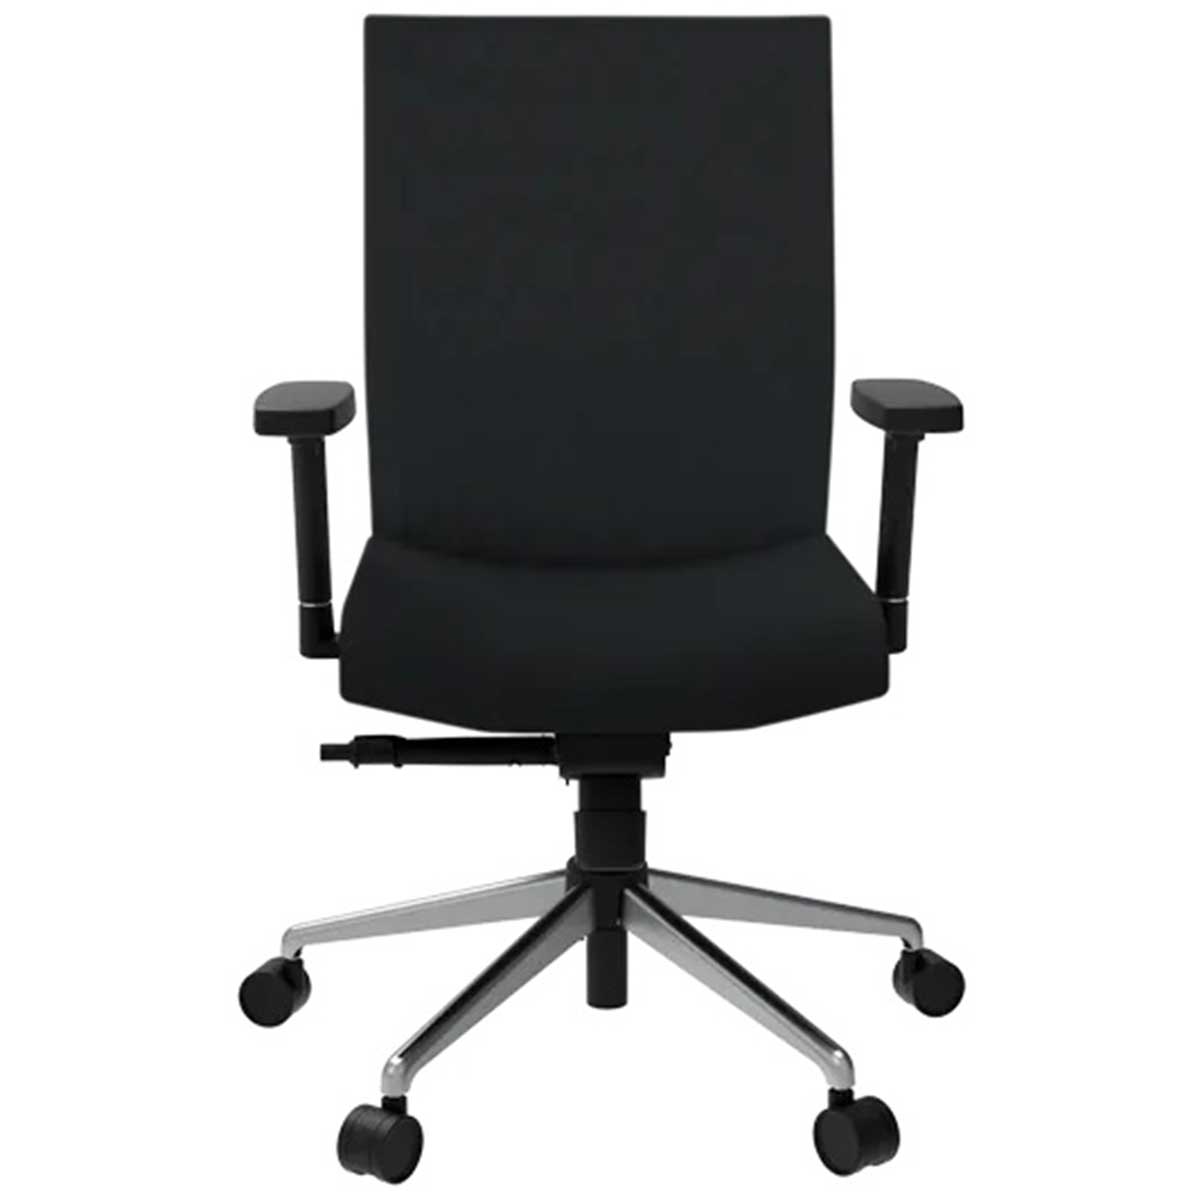 Staff Chair Manufacturers, Suppliers in Dwarka Sector 22